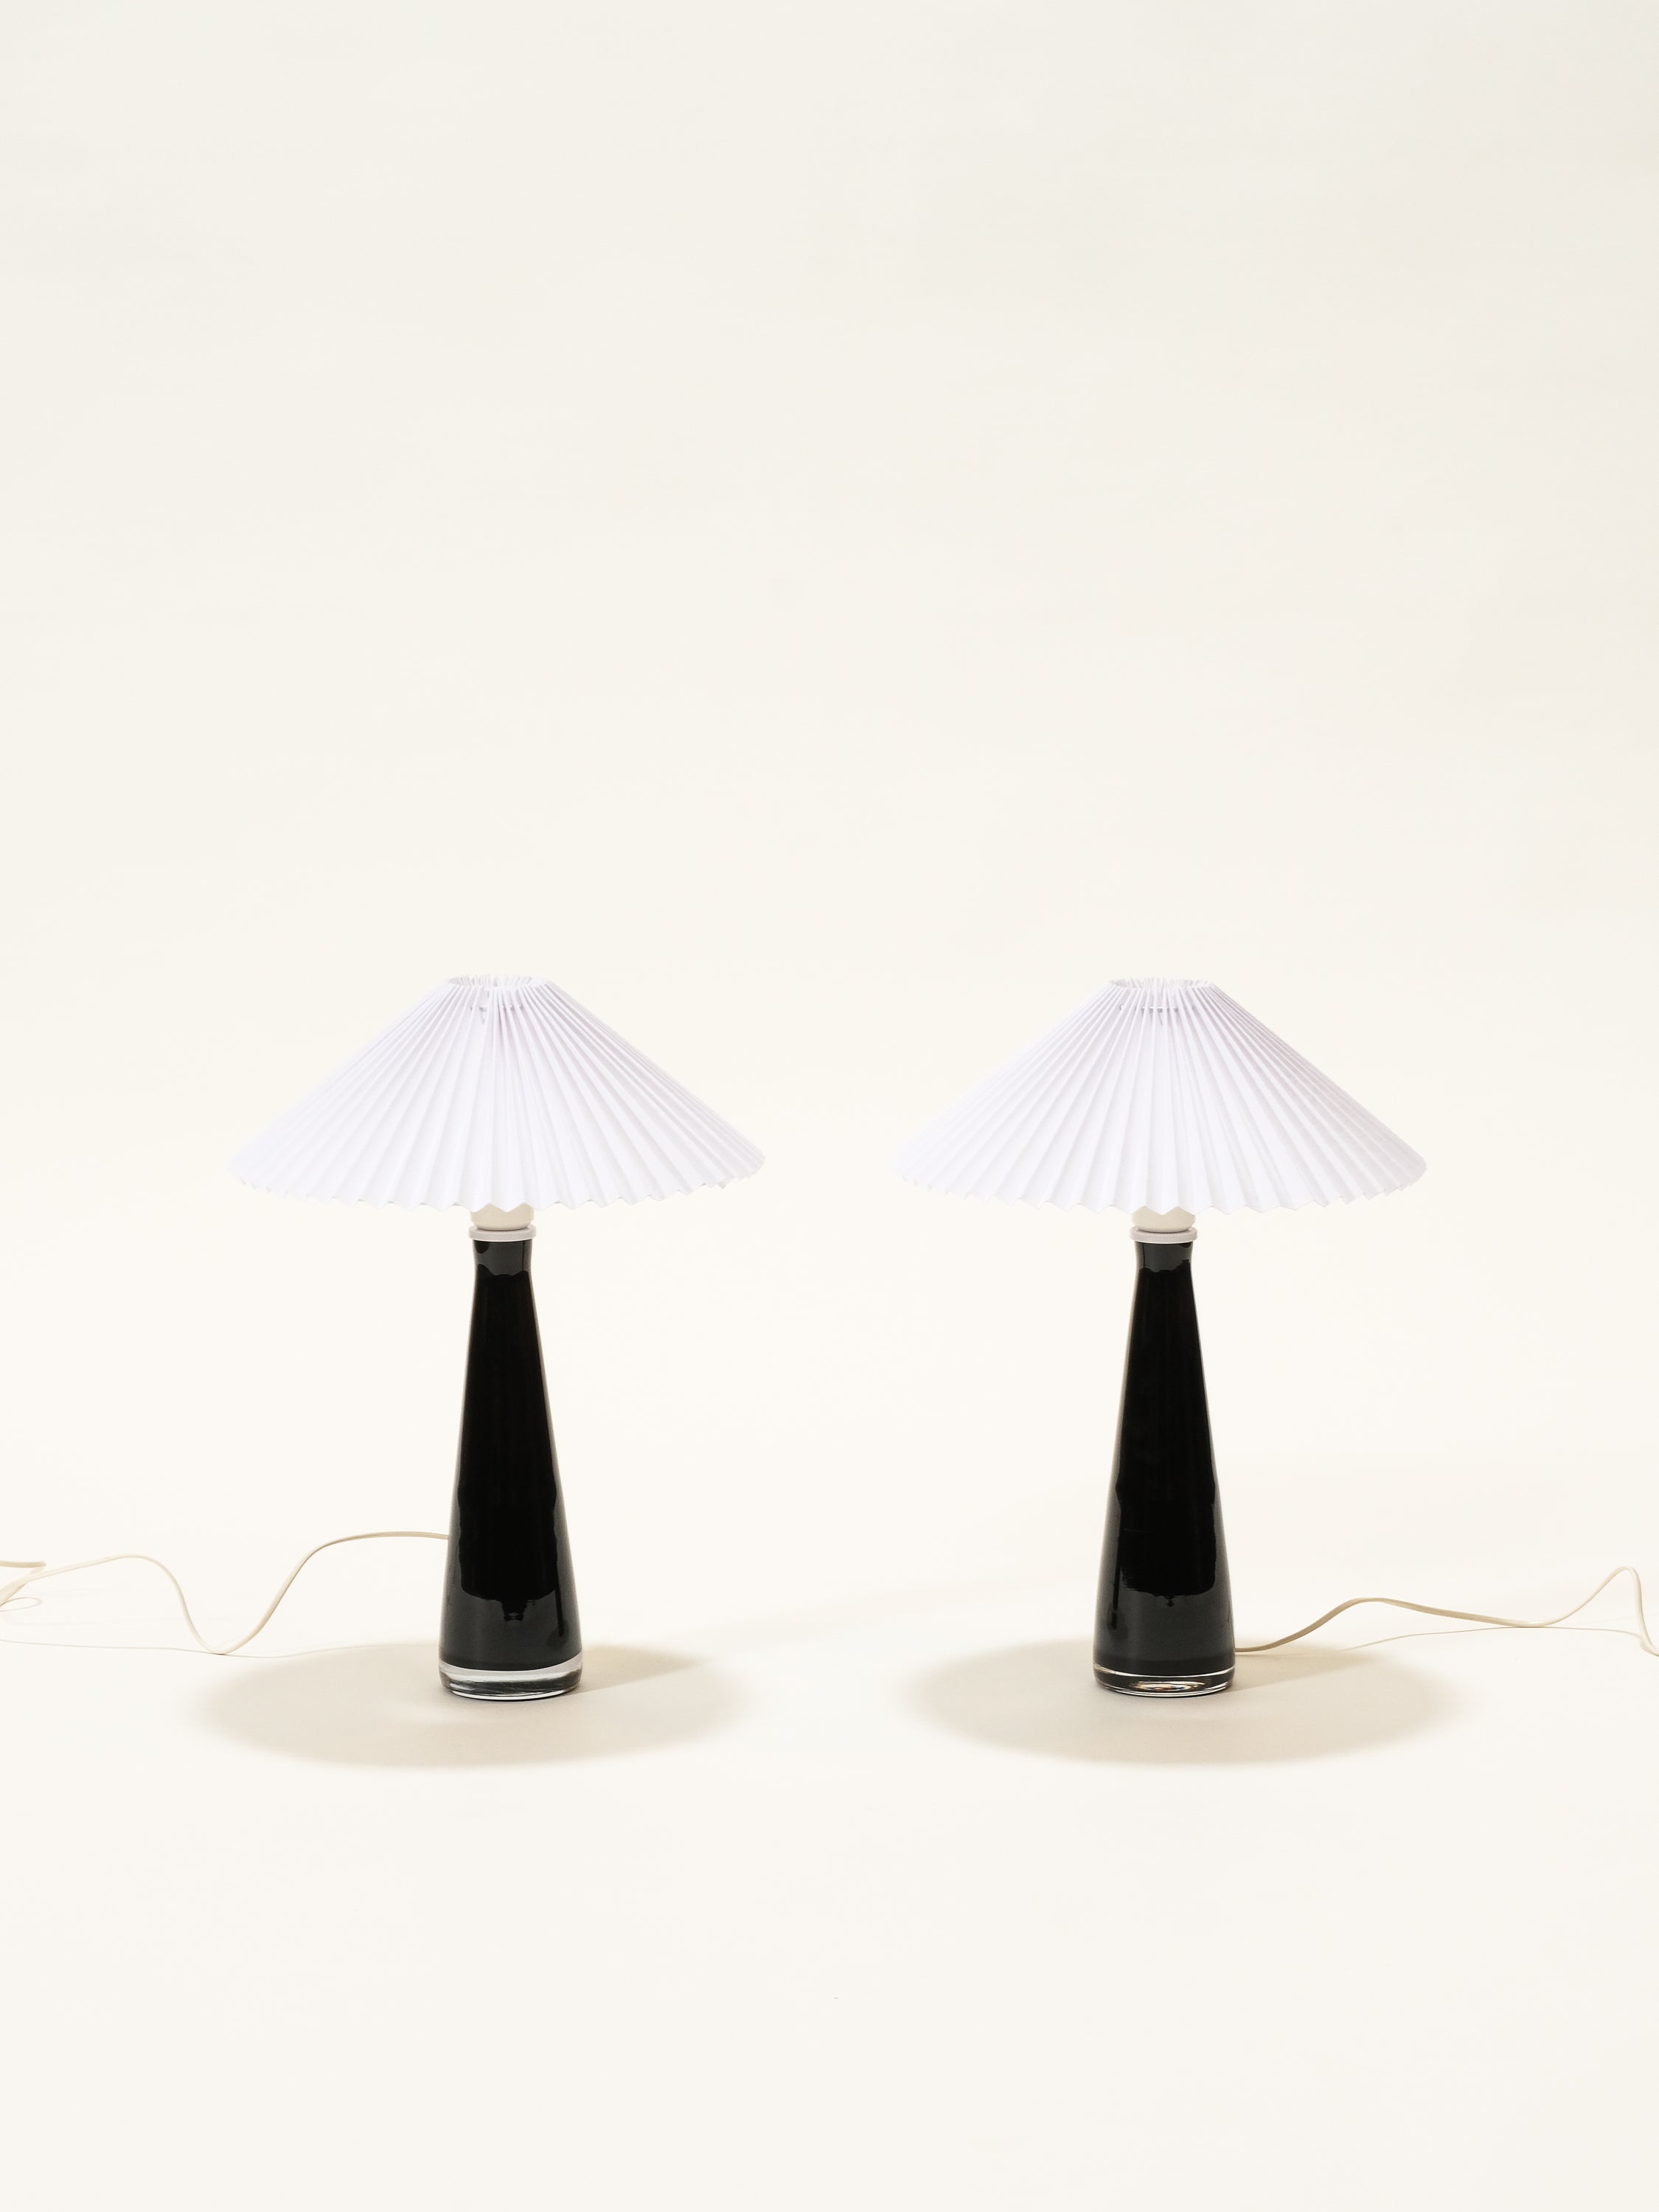 Pair of Glass Table Lamps, Sweden, 1960s